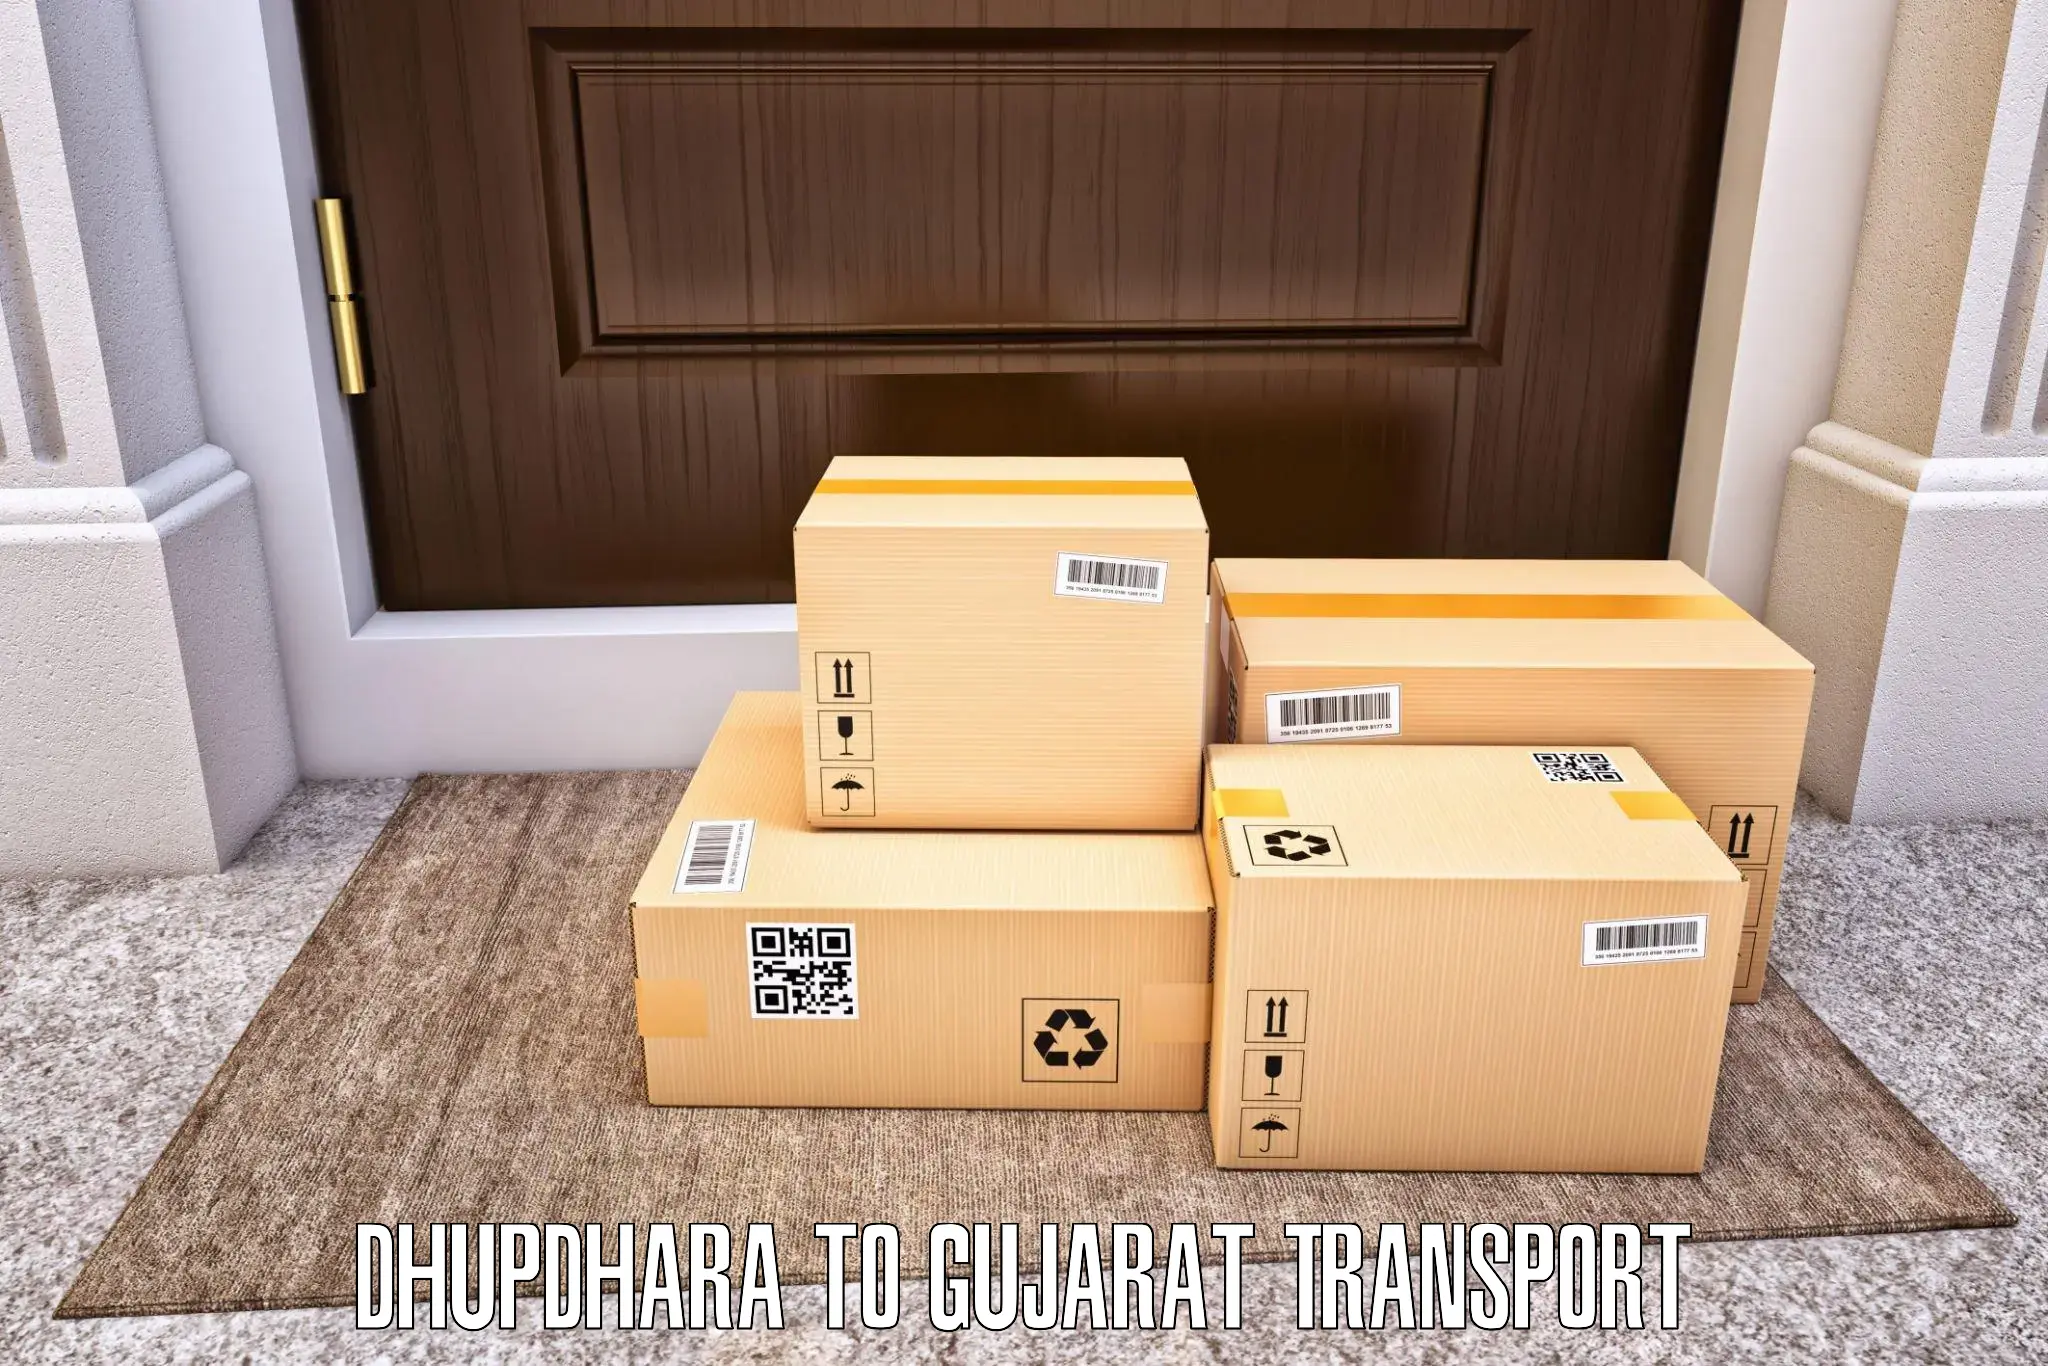 Delivery service Dhupdhara to Surat